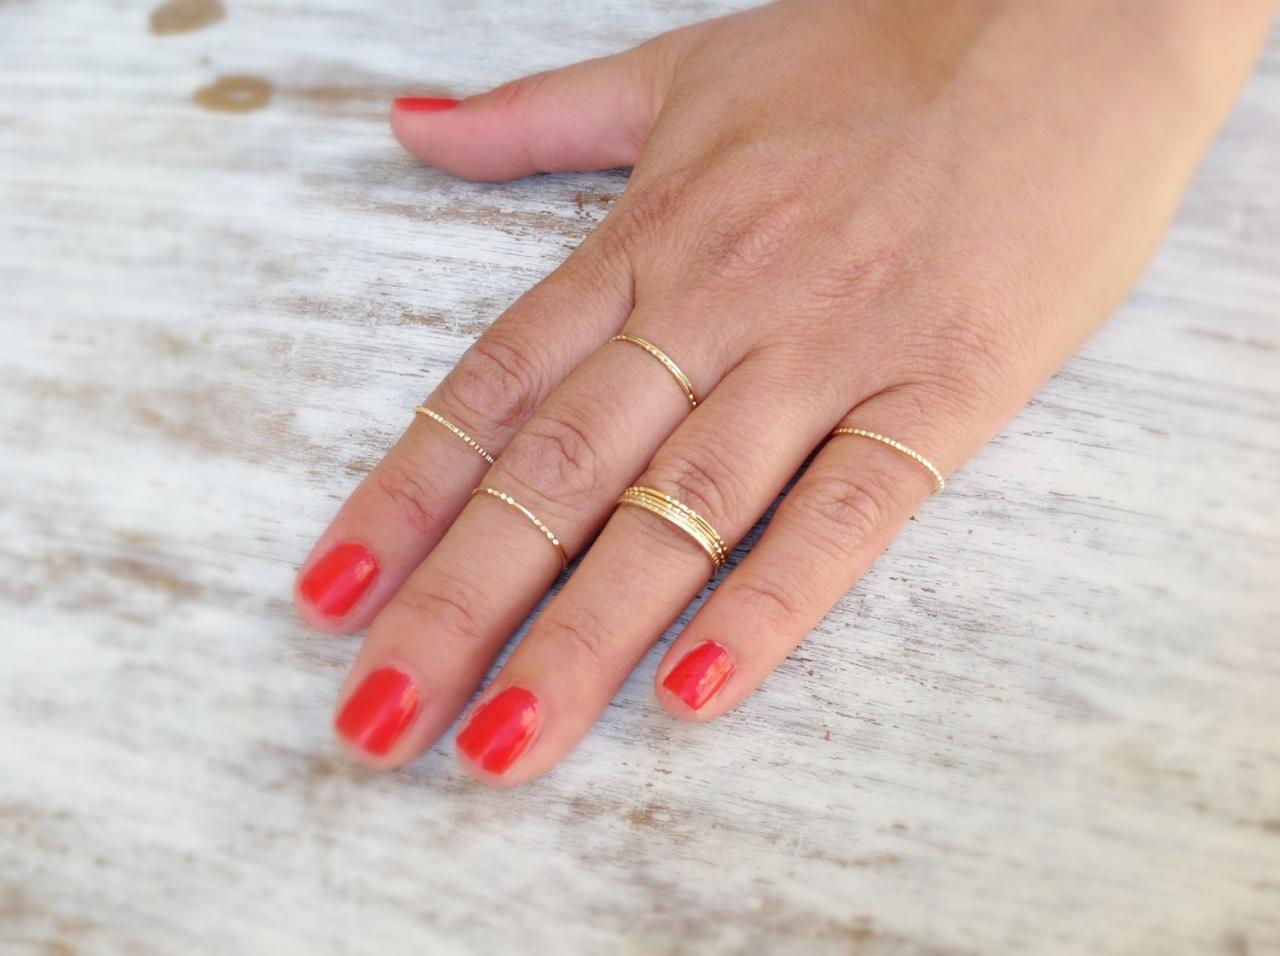 Special -5 Gold Rings, Stacking Ring, Stacking Gold Rings, Knuckle Rings, Thin Ring, Hammered Ring, Tiny Ring- Rr2